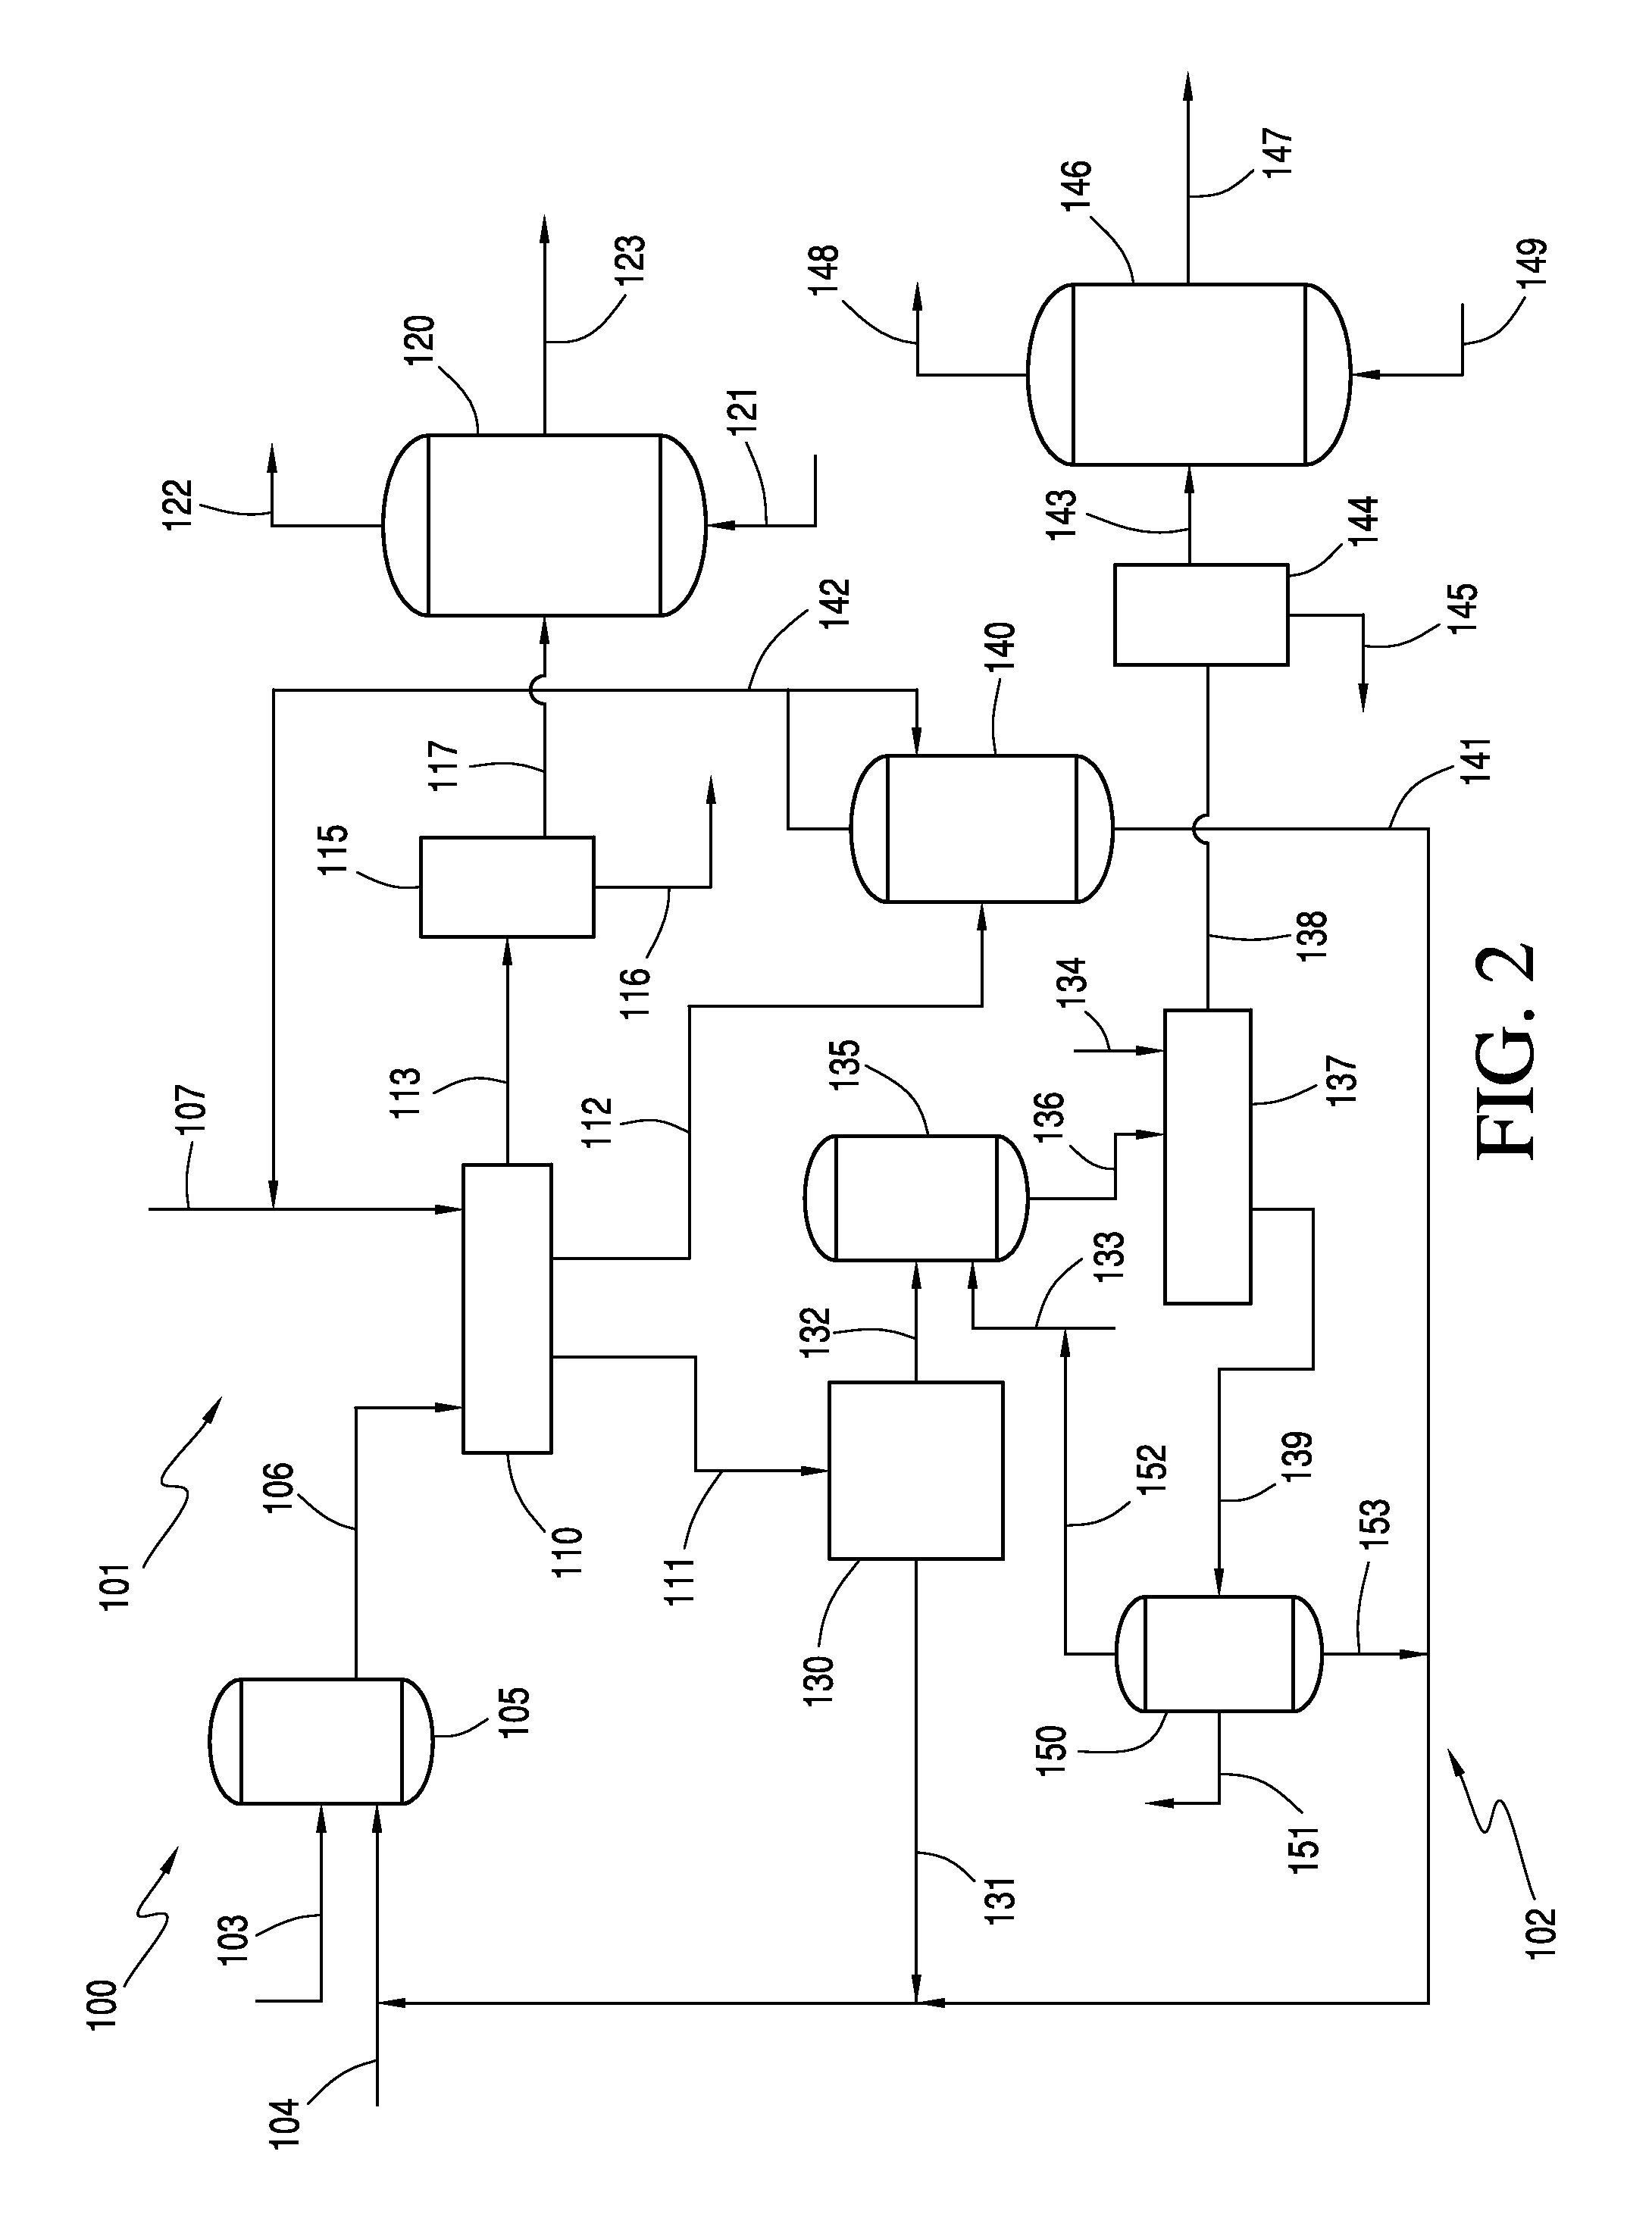 Processes for pretreating and purifying a cellulosic material